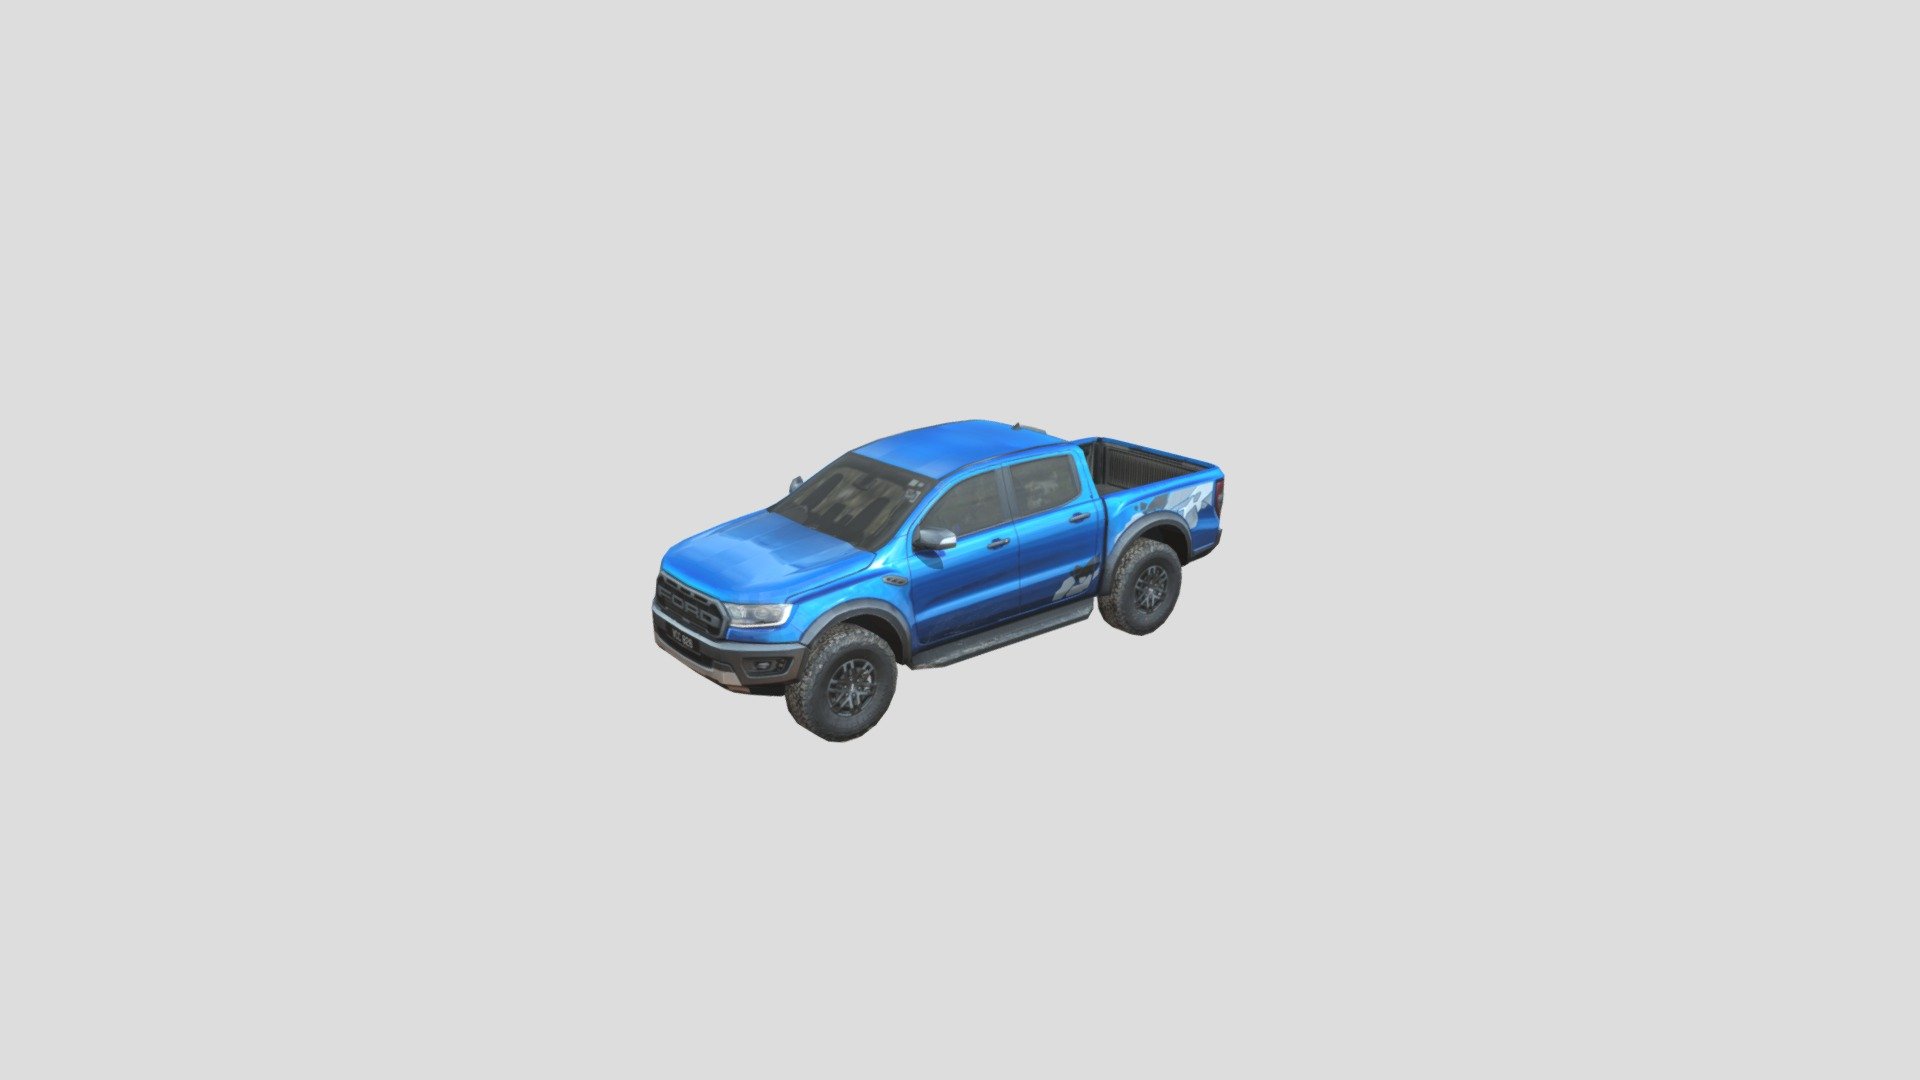 Car Ford Ranger Raptor 2021. Low poly model car with UV map texture. Created by 3dsMax 2014 Different file formats: 3dsMax,FBX,OBG,3ds,stl. The model can be used for games. Polys: 2580 Verts: 2671 UV map texture size: 2048x2048 px 3d model